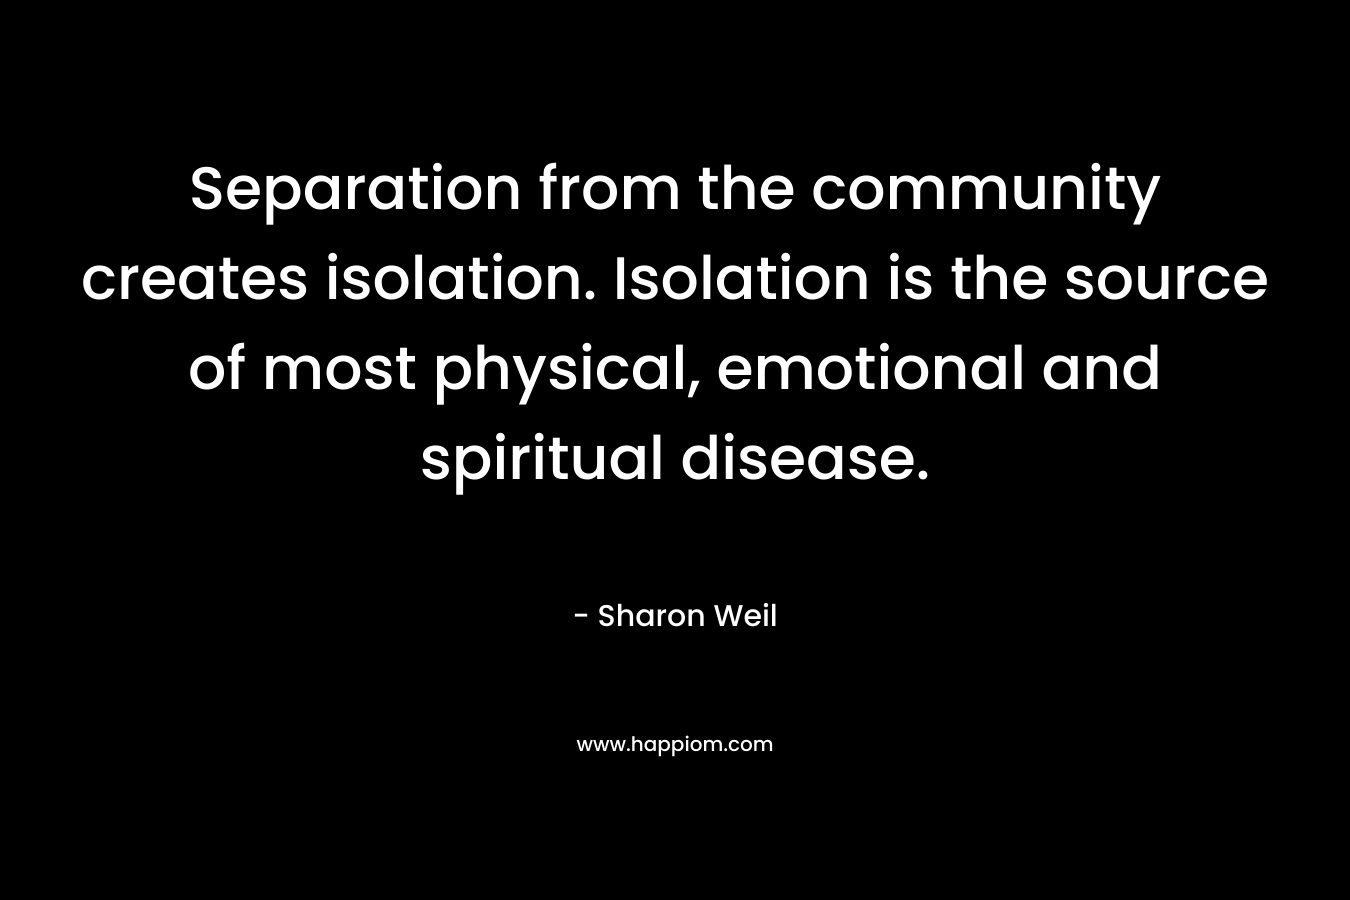 Separation from the community creates isolation. Isolation is the source of most physical, emotional and spiritual disease.